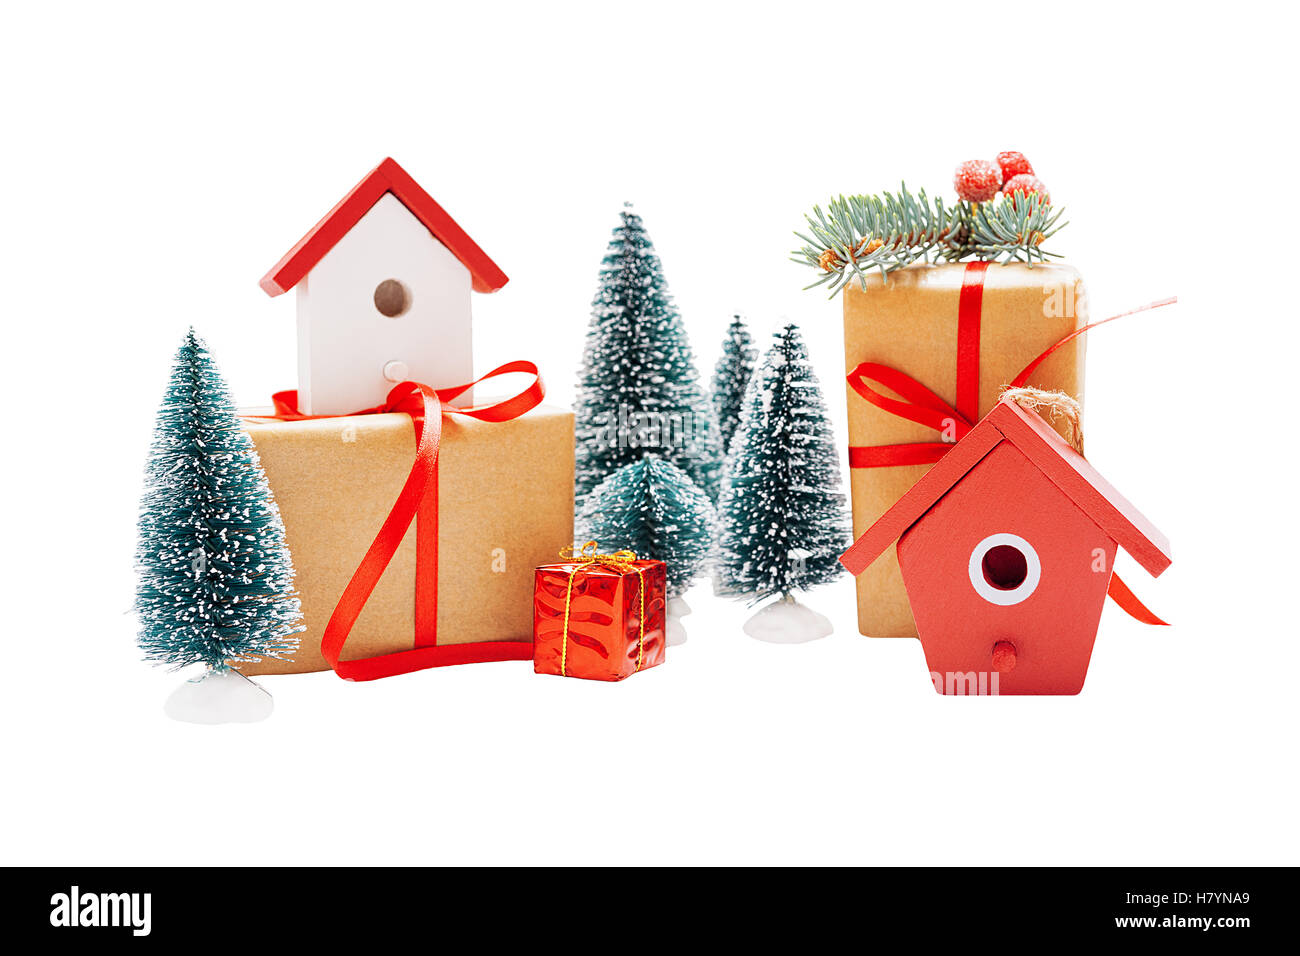 Christmas linear arrangement of birdhouses, trees and gift boxes isolated on white Stock Photo